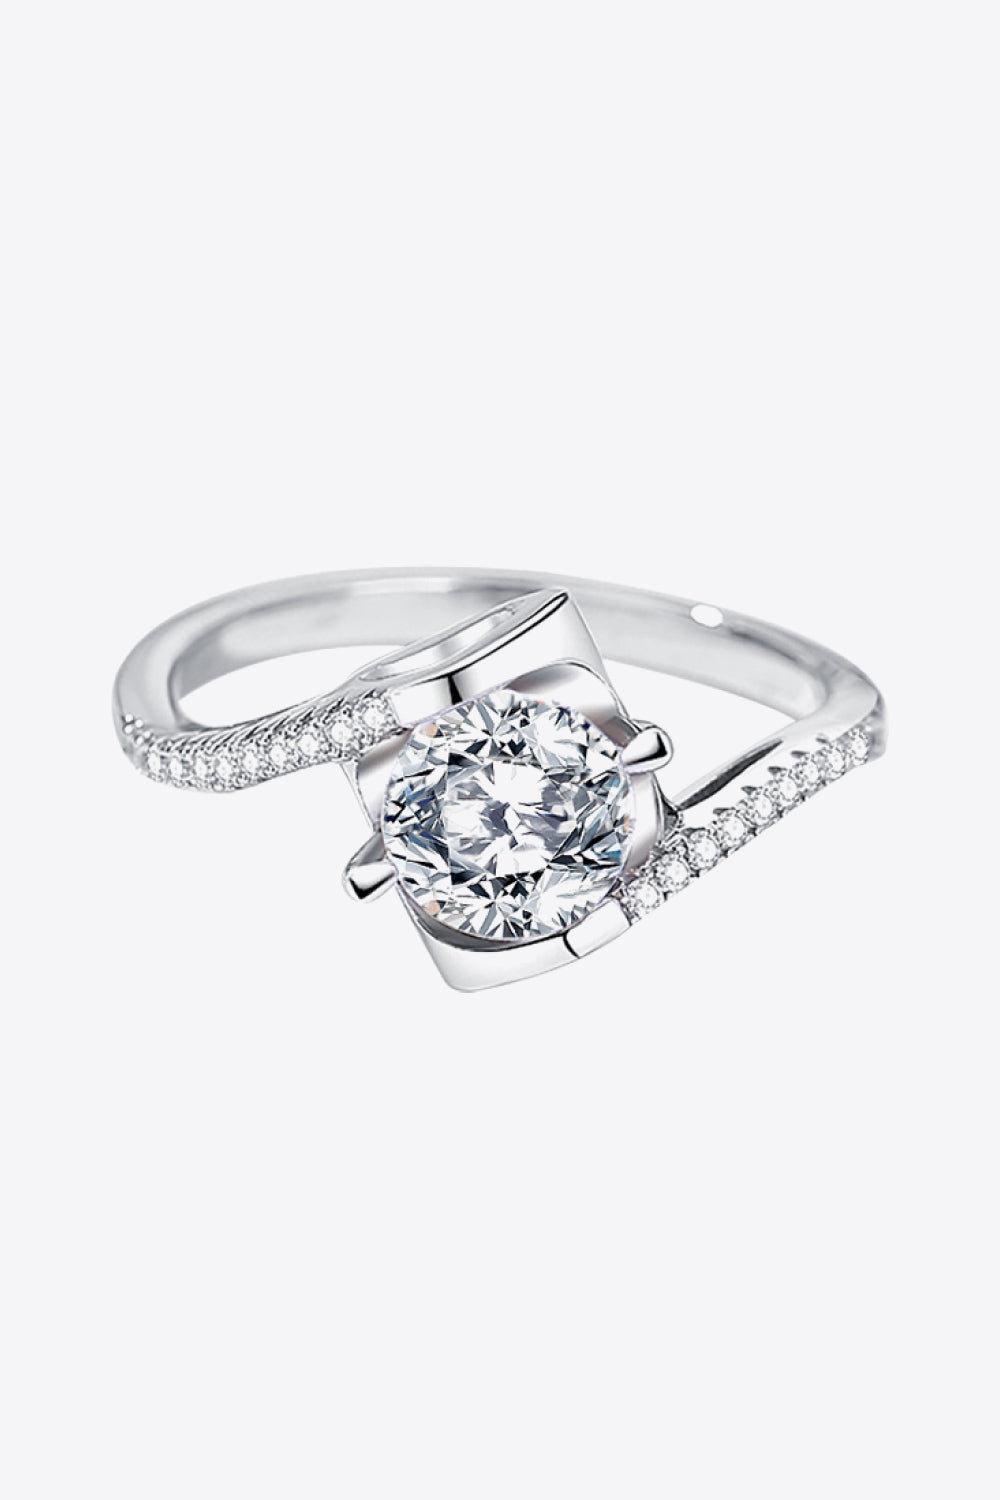 Darling You 925 Sterling Silver Moissanite Ring - Tophatter Deals